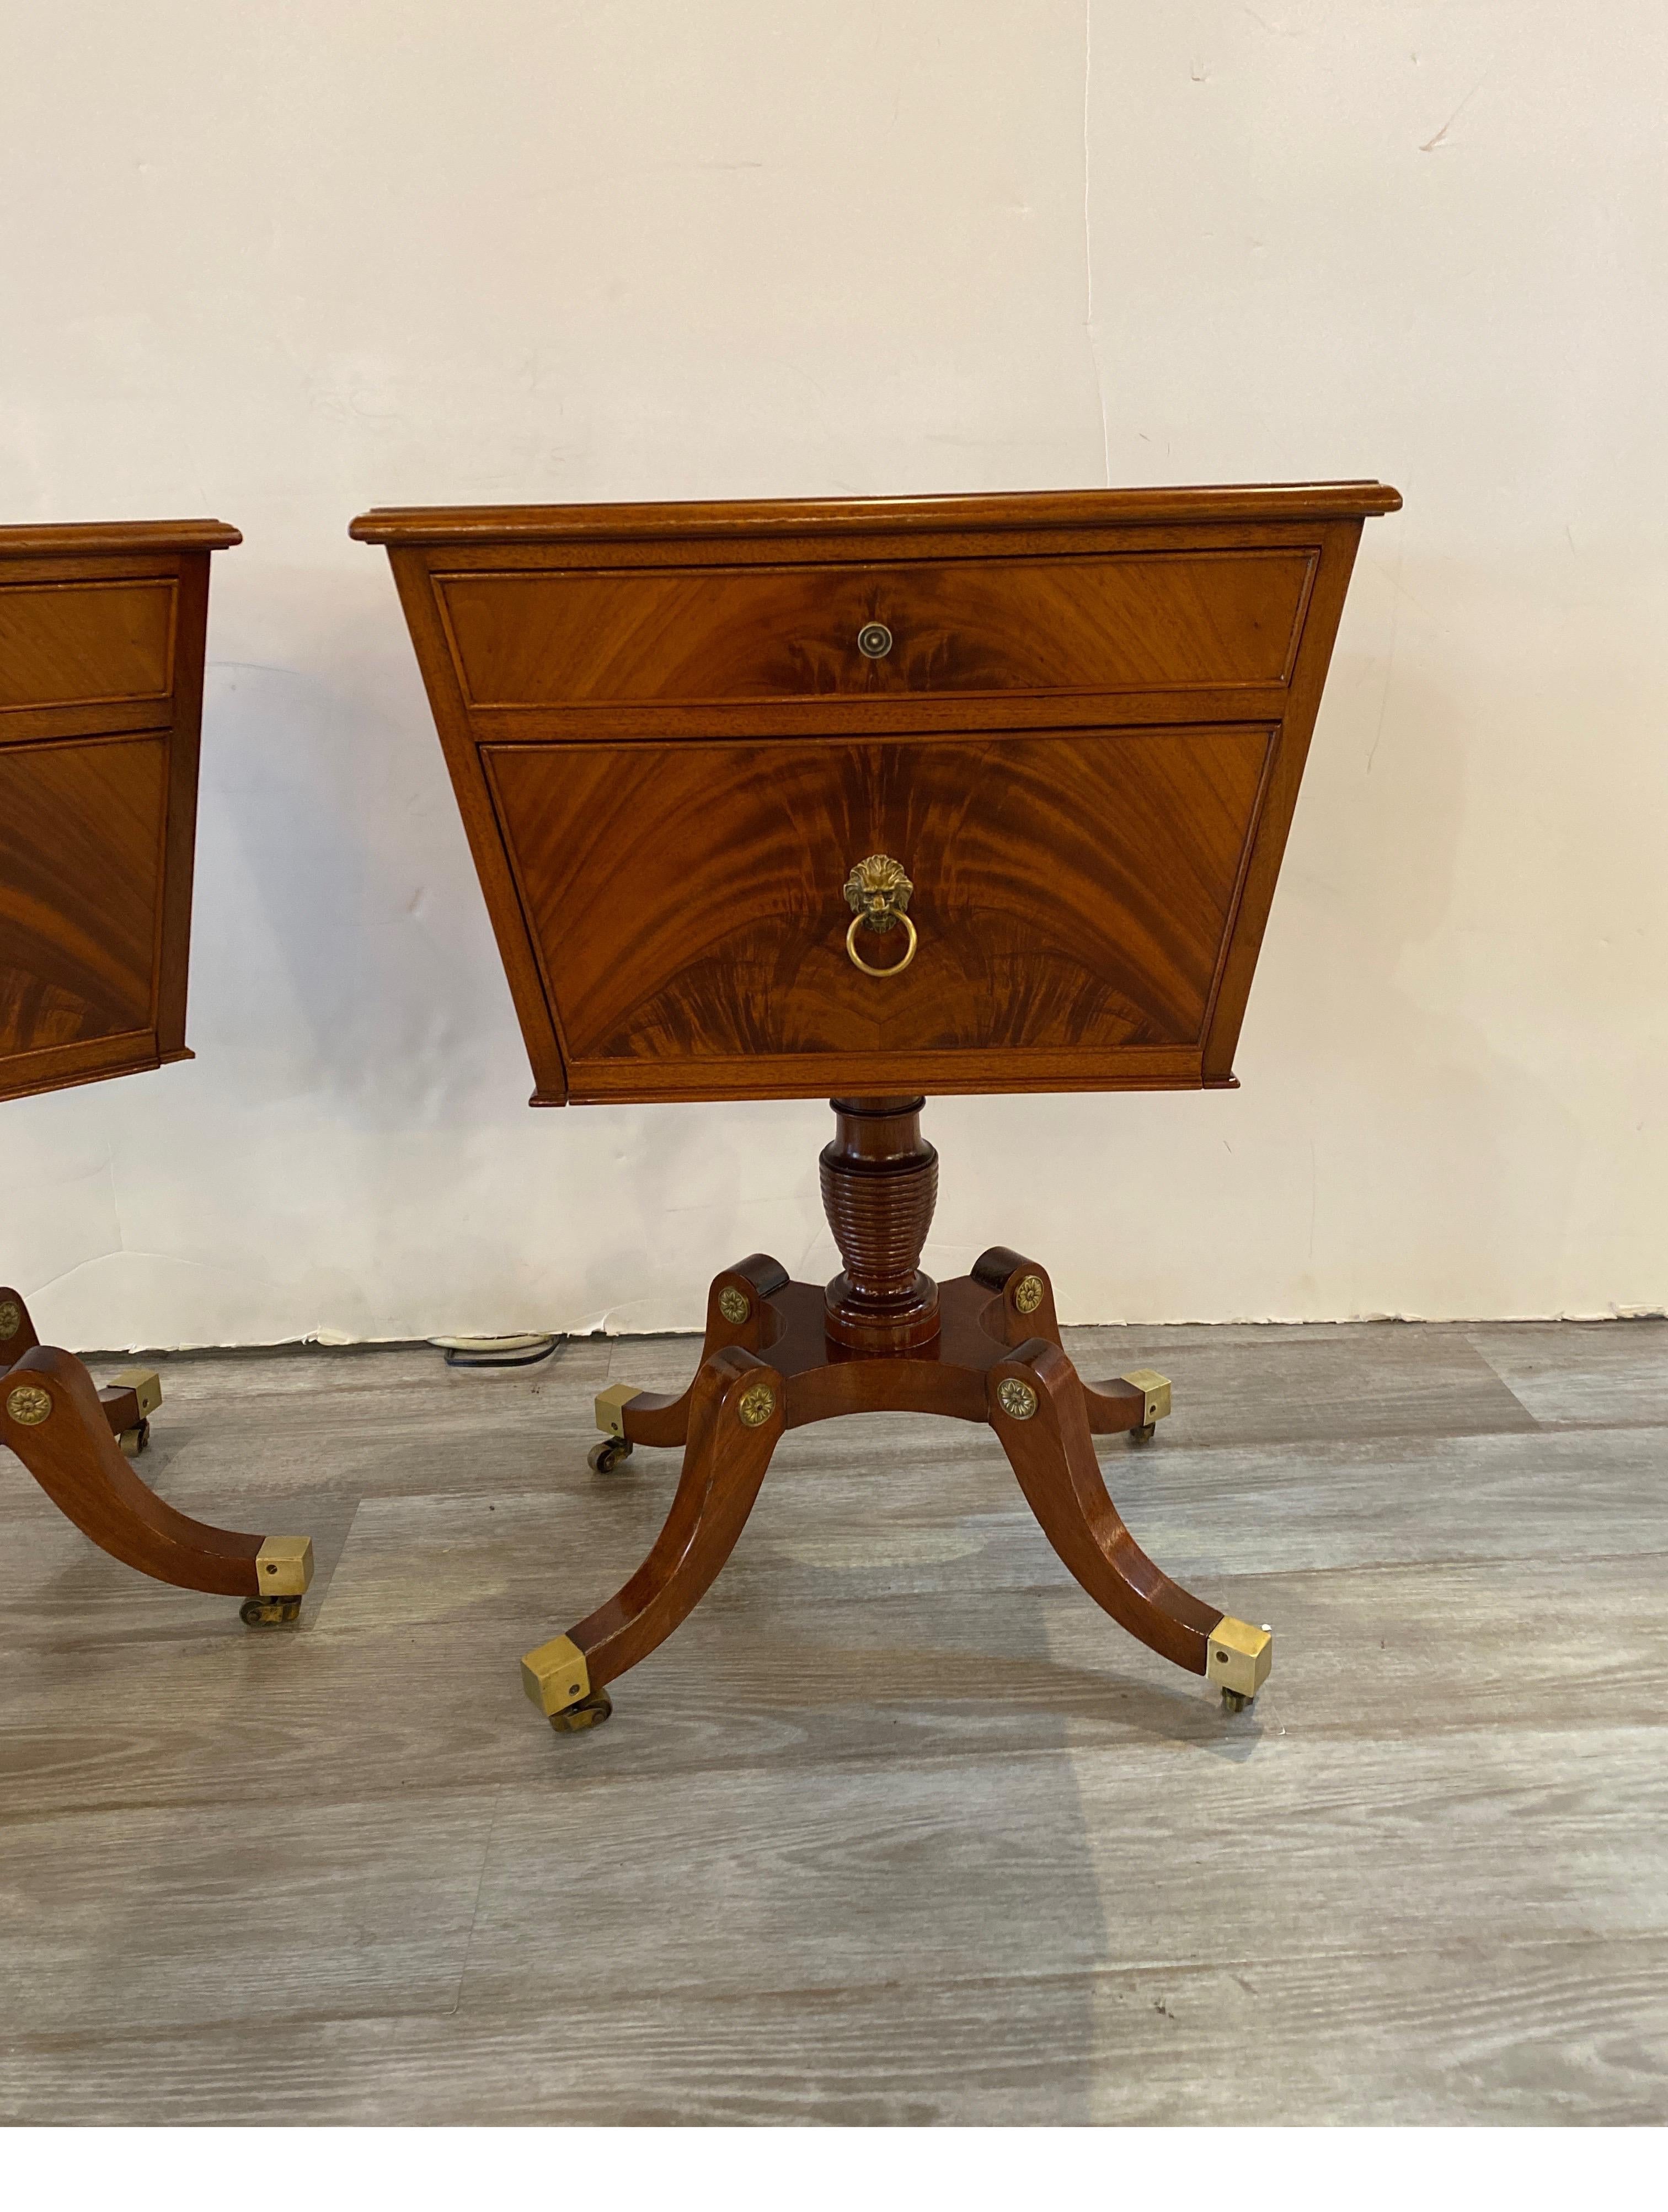 An elegant pair of Regency style flame mahogany pedestal cabinets. The warm mahogany with cast brass lion head accents on the sides and front with a pull down door for storage and top drawer. The cabinets on a center column with four brass capped